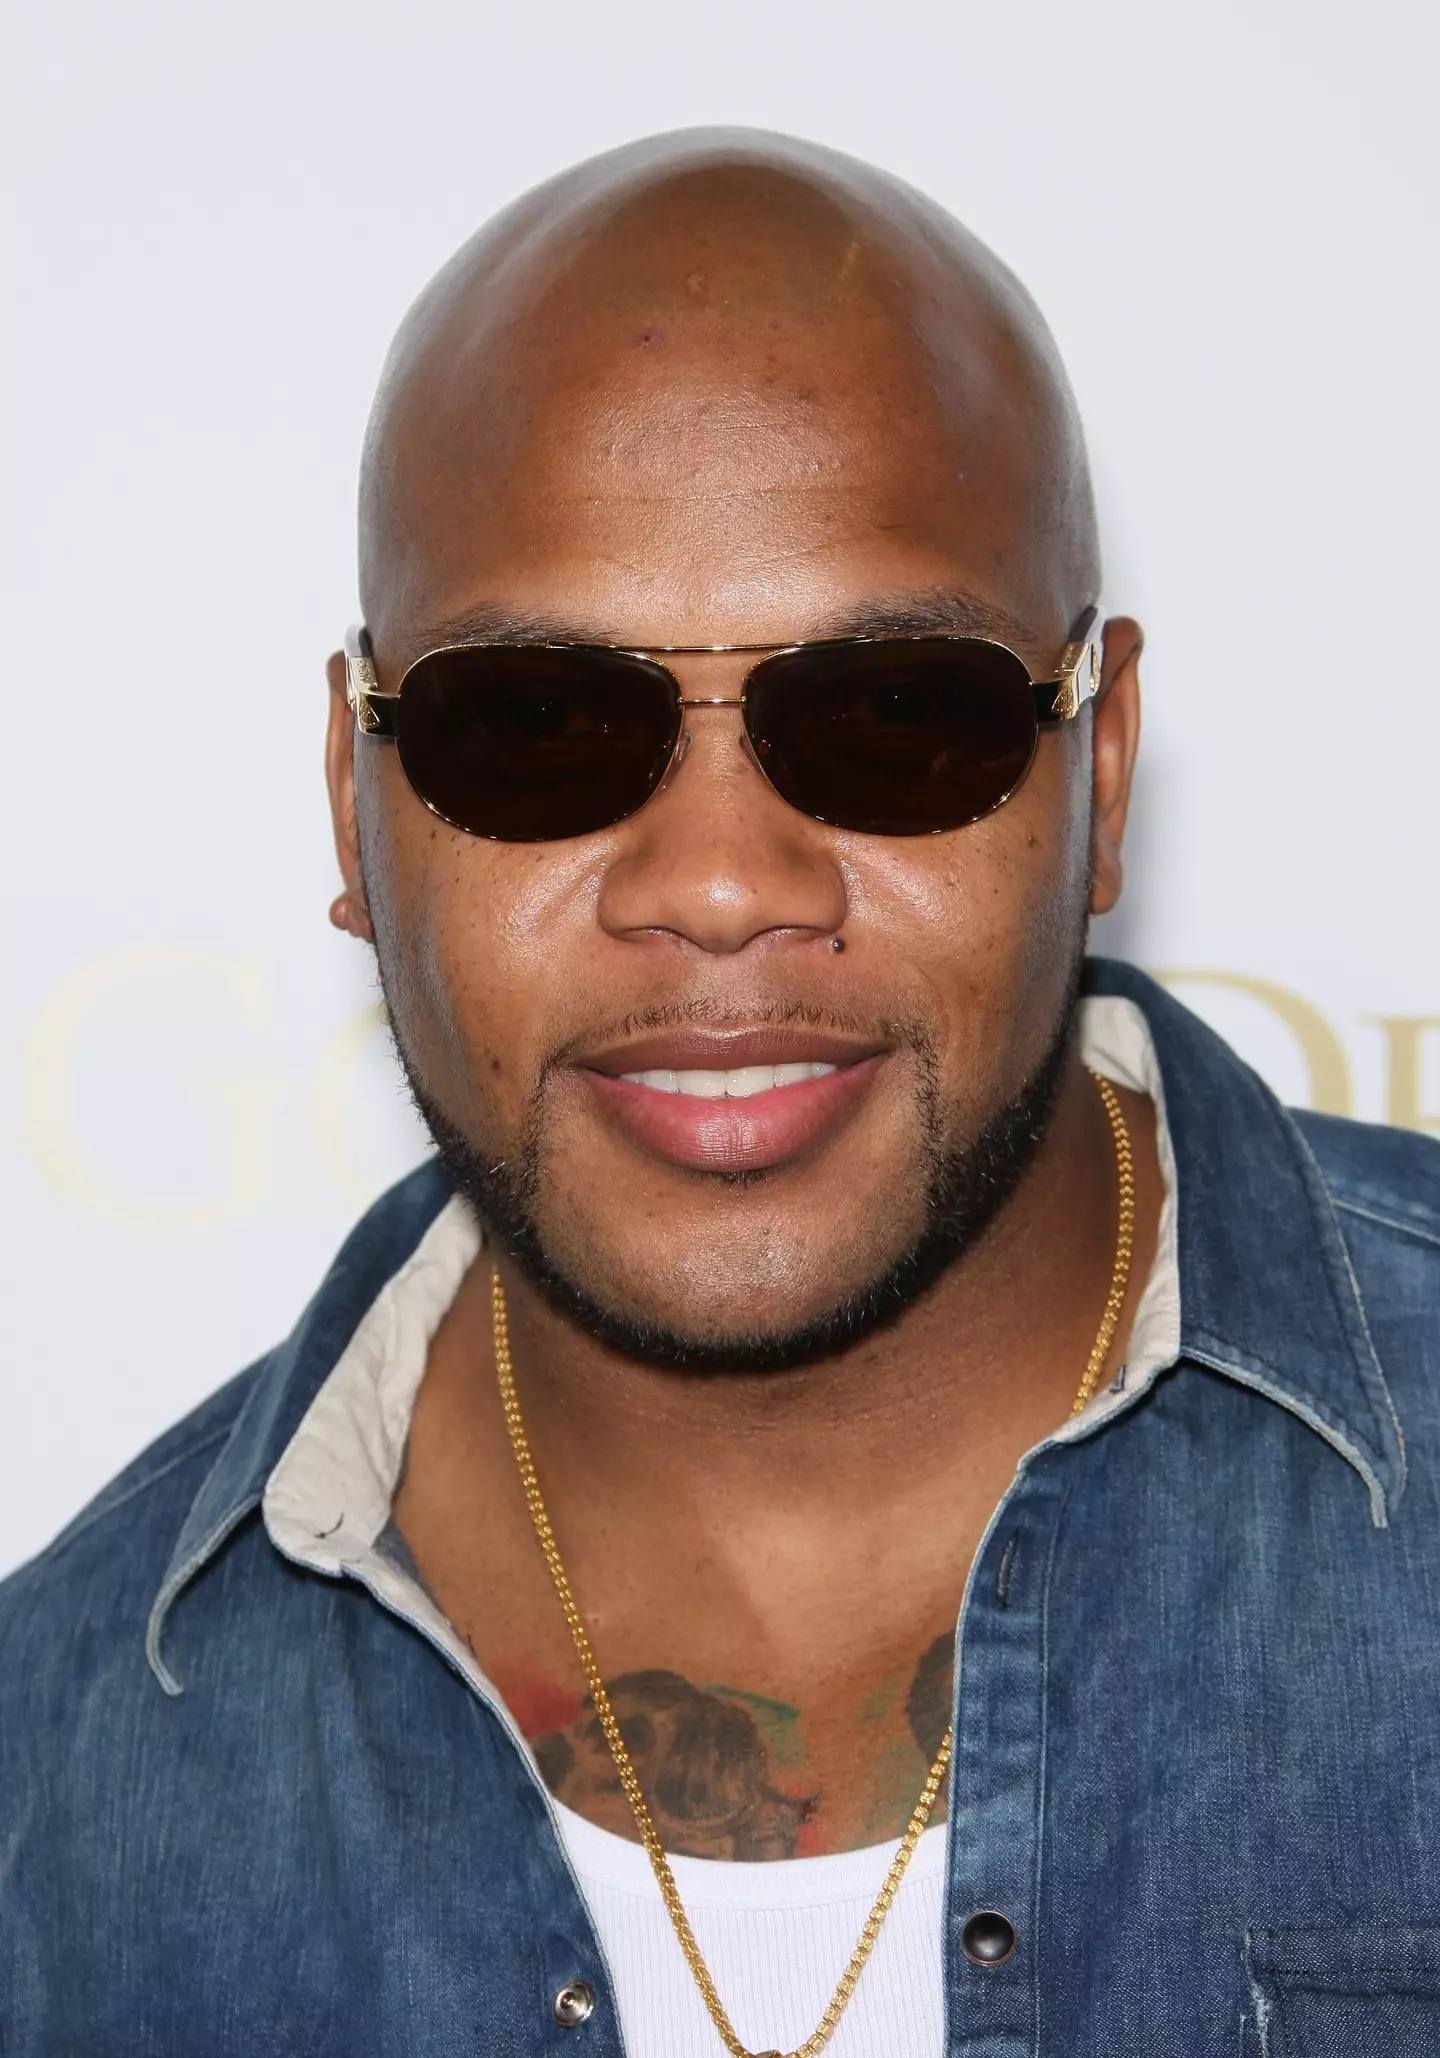 Flo Rida has sold over 100 million records.